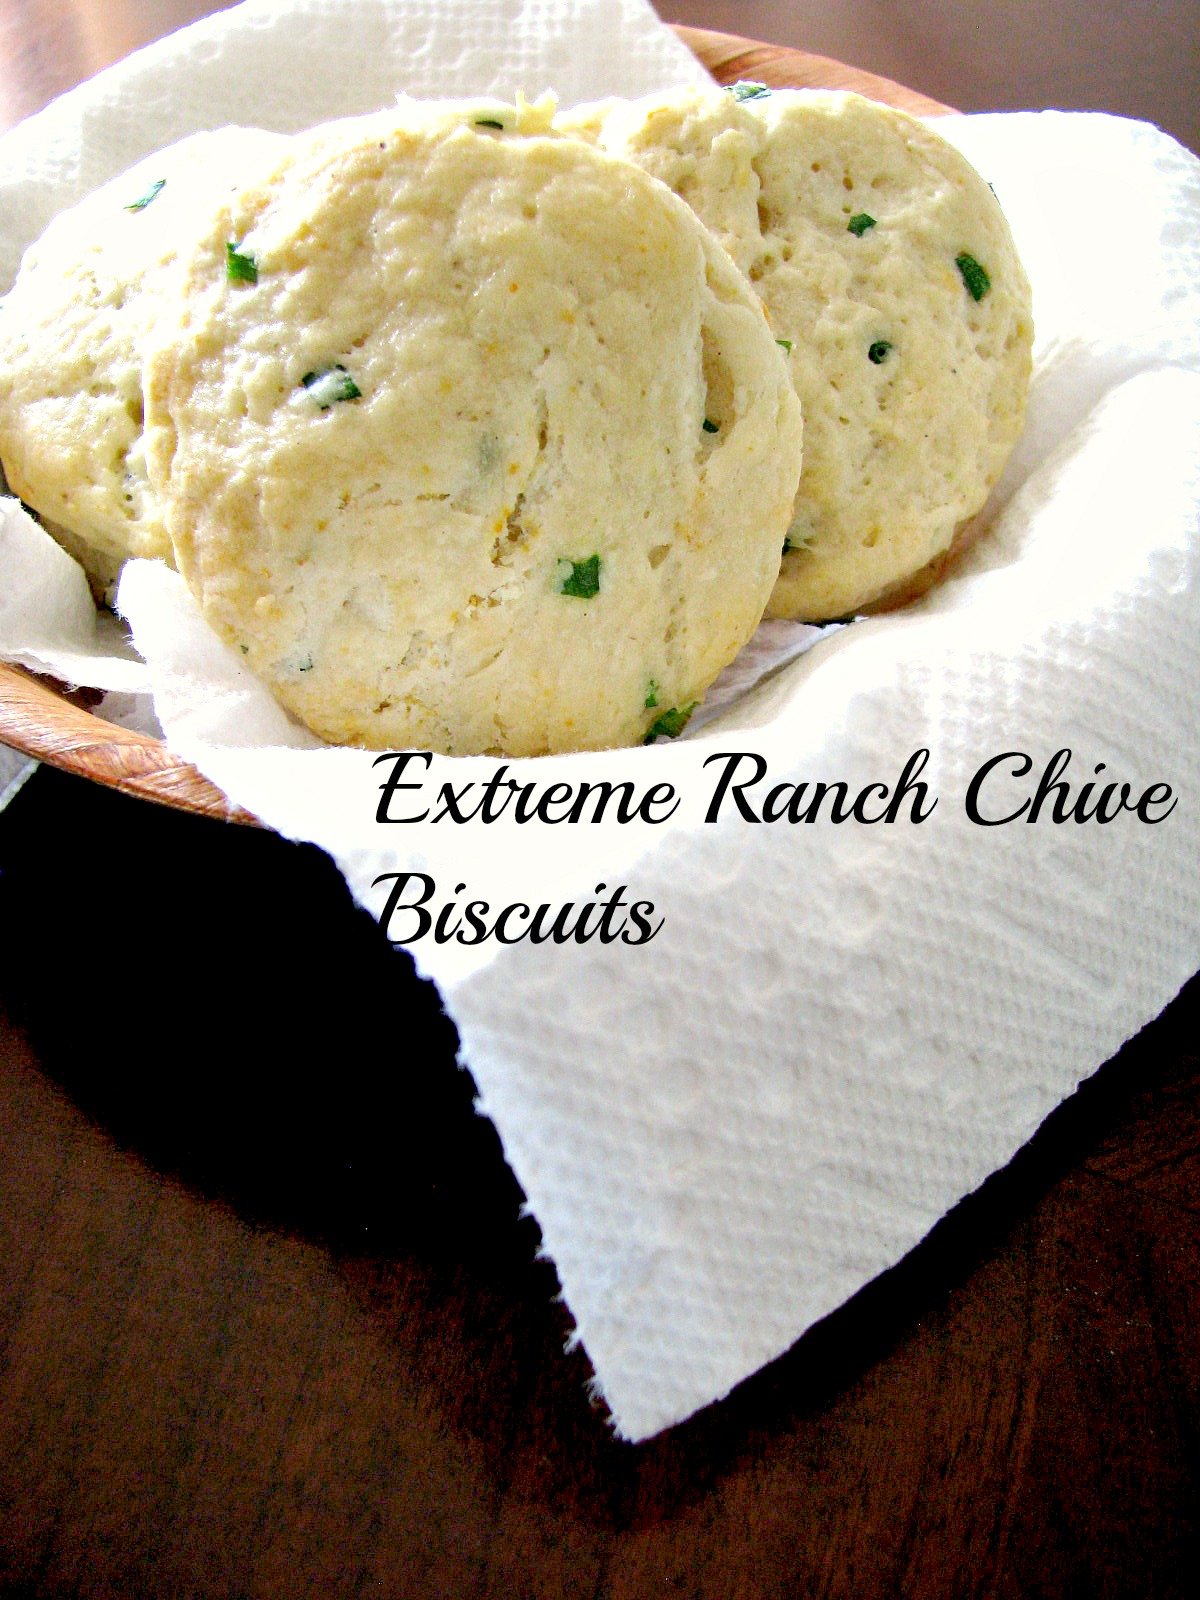 Extreme Ranch Chive Biscuits- Quick and easy biscuits made with ranch dressing and loaded with in-season fresh chives. Ready in less than 30 minutes, eat them while they are hot right out of the oven! 